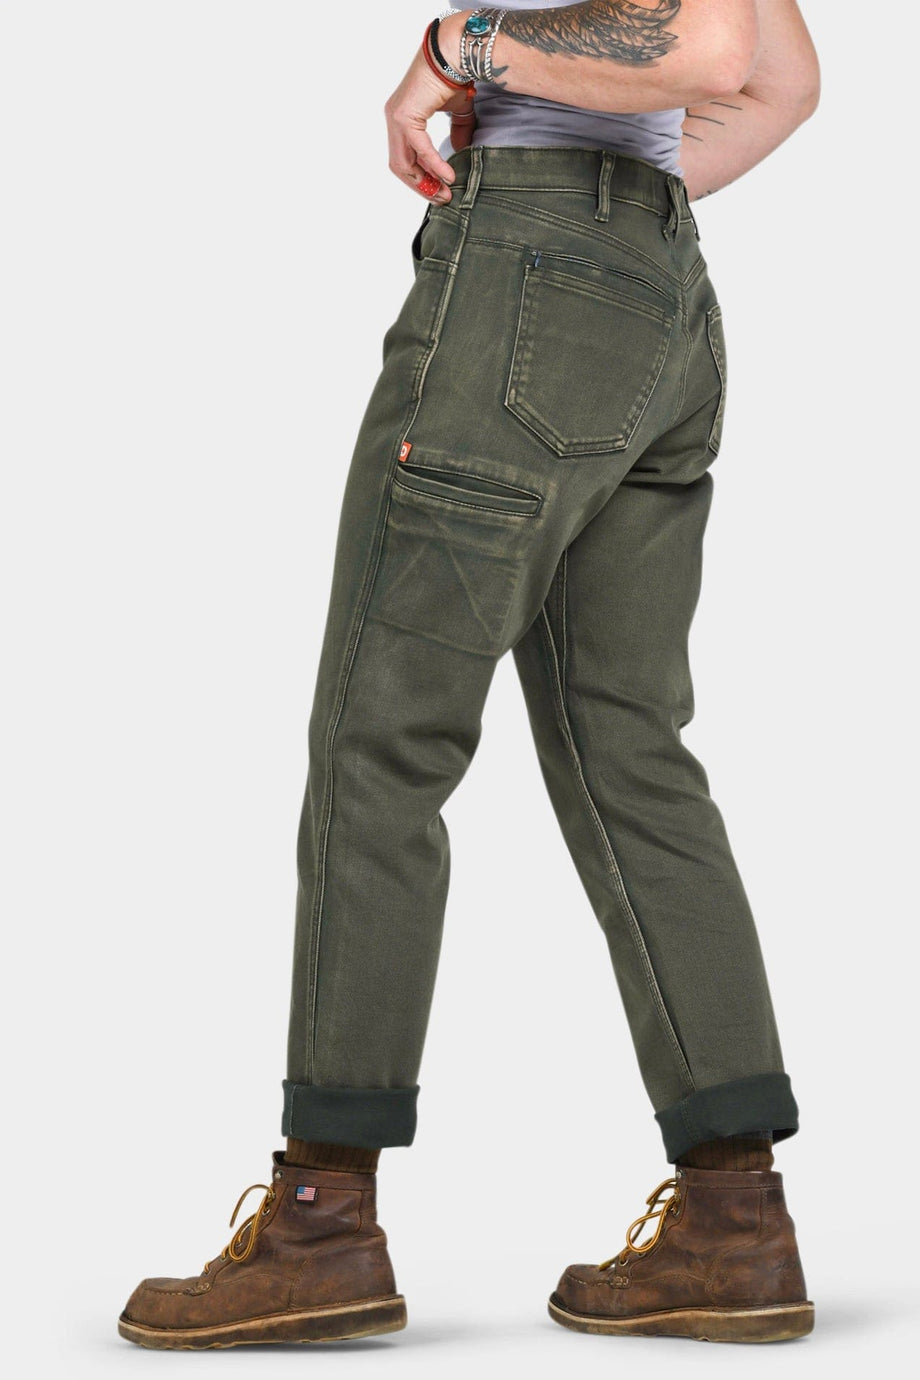 Buy Green Trousers & Pants for Men by iVOC Online | Ajio.com